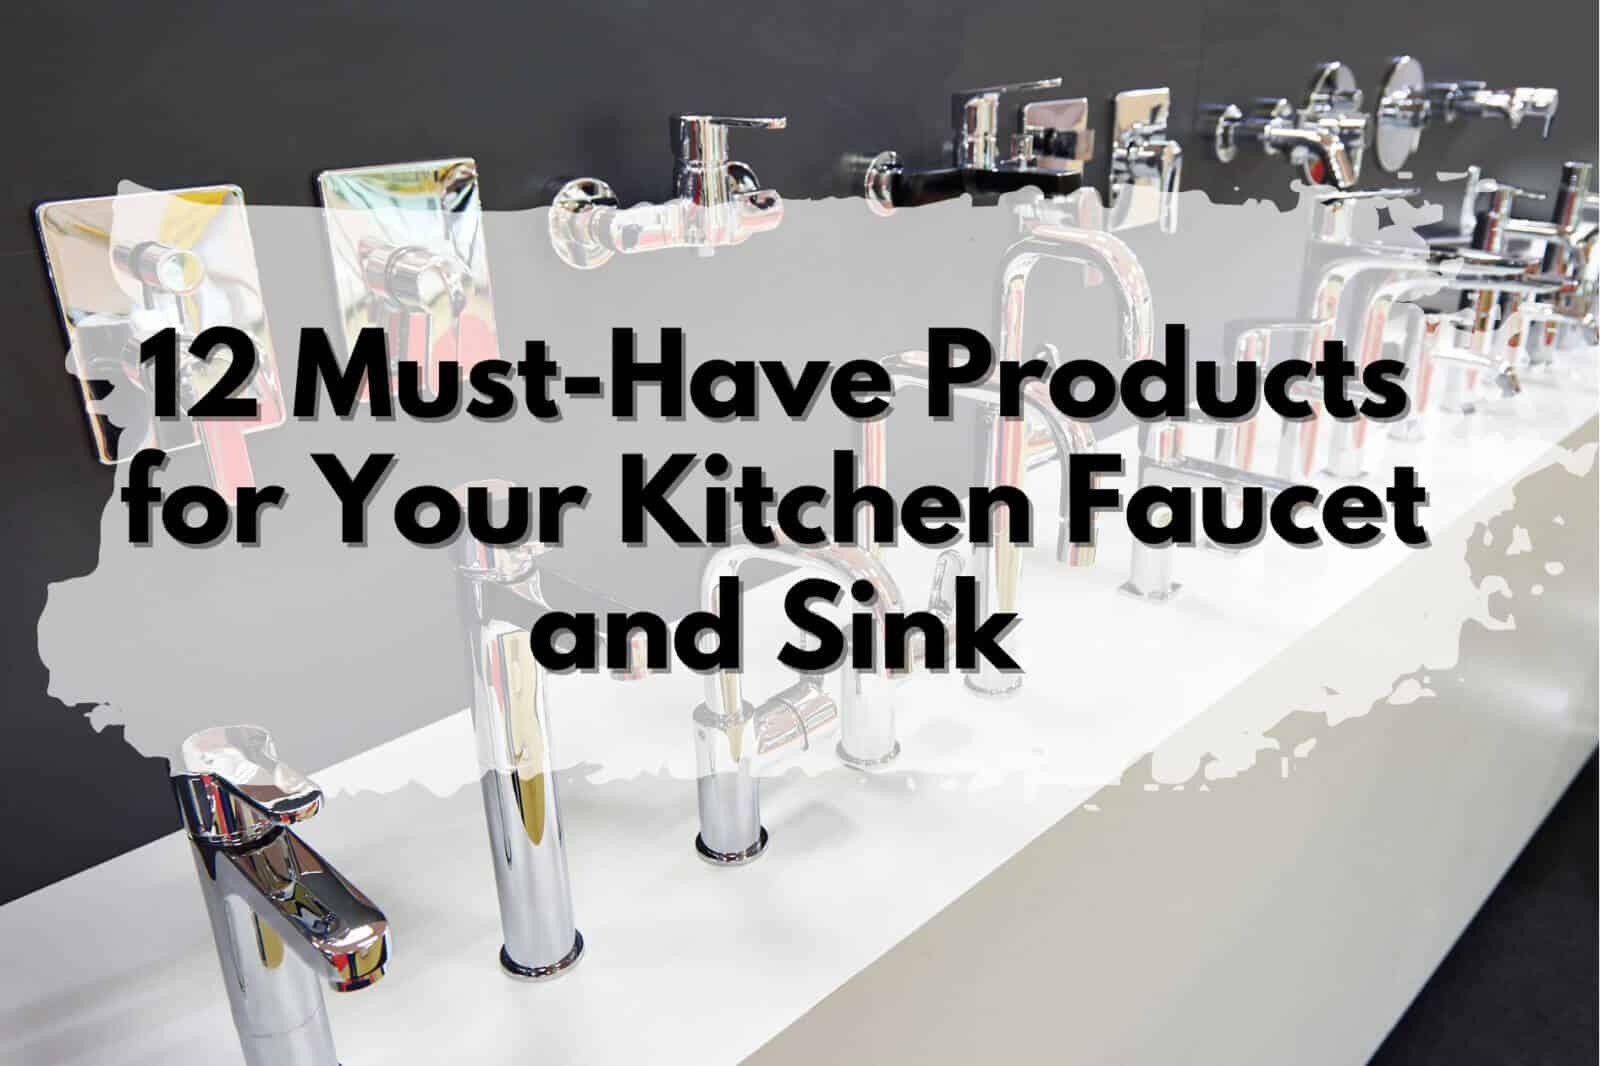 12 essential items for kitchen sink and faucet.